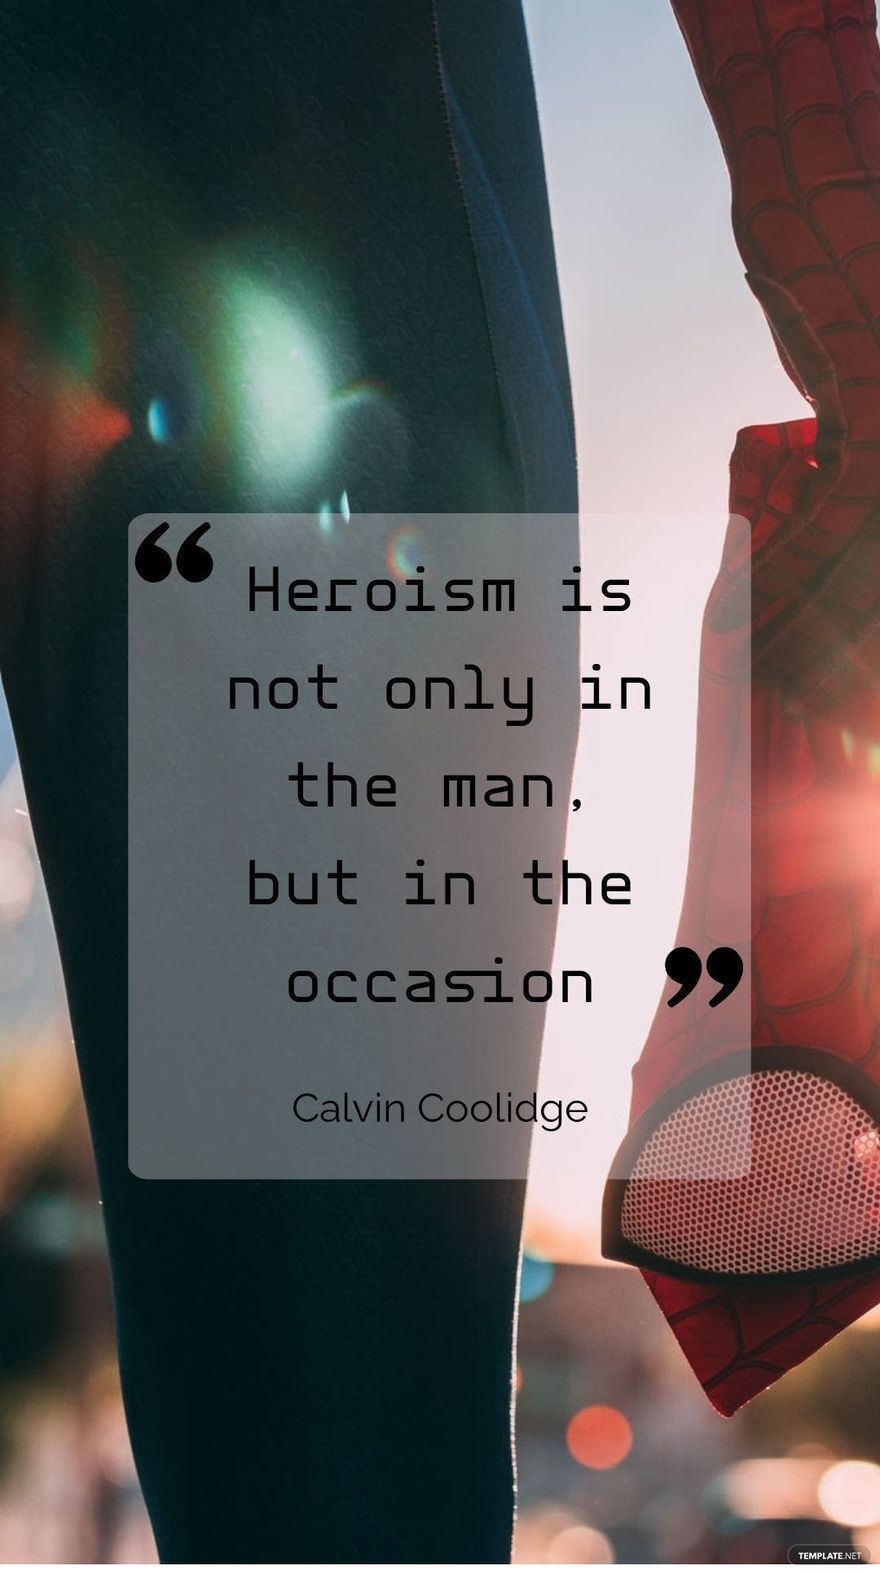 Calvin Coolidge - Heroism is not only in the man, but in the occasion